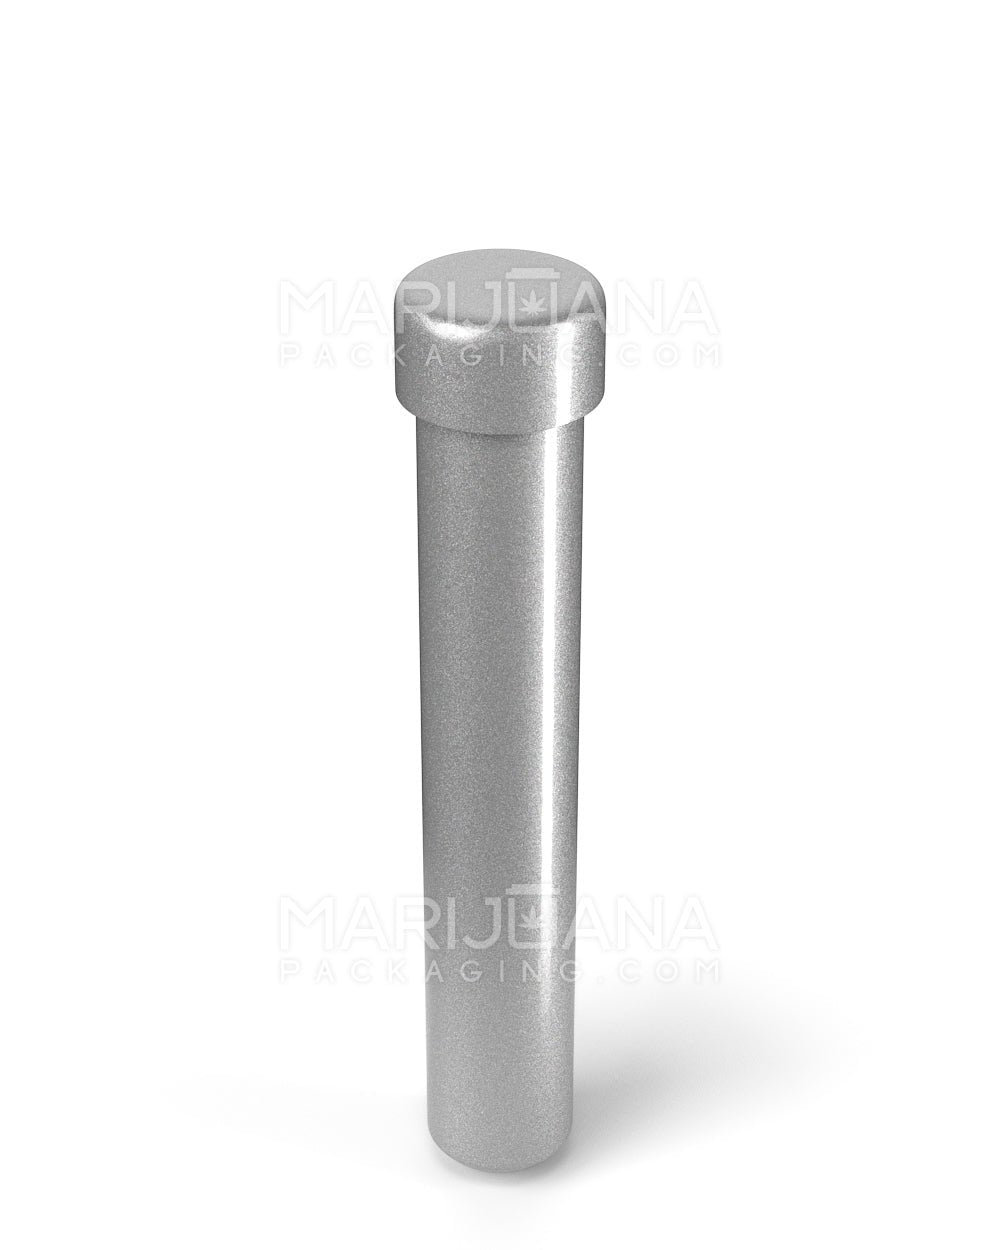 Child Resistant | King Size Pop Top Opaque Metal Pre-Roll Tubes | 110mm - Silver - 250 Count - 2